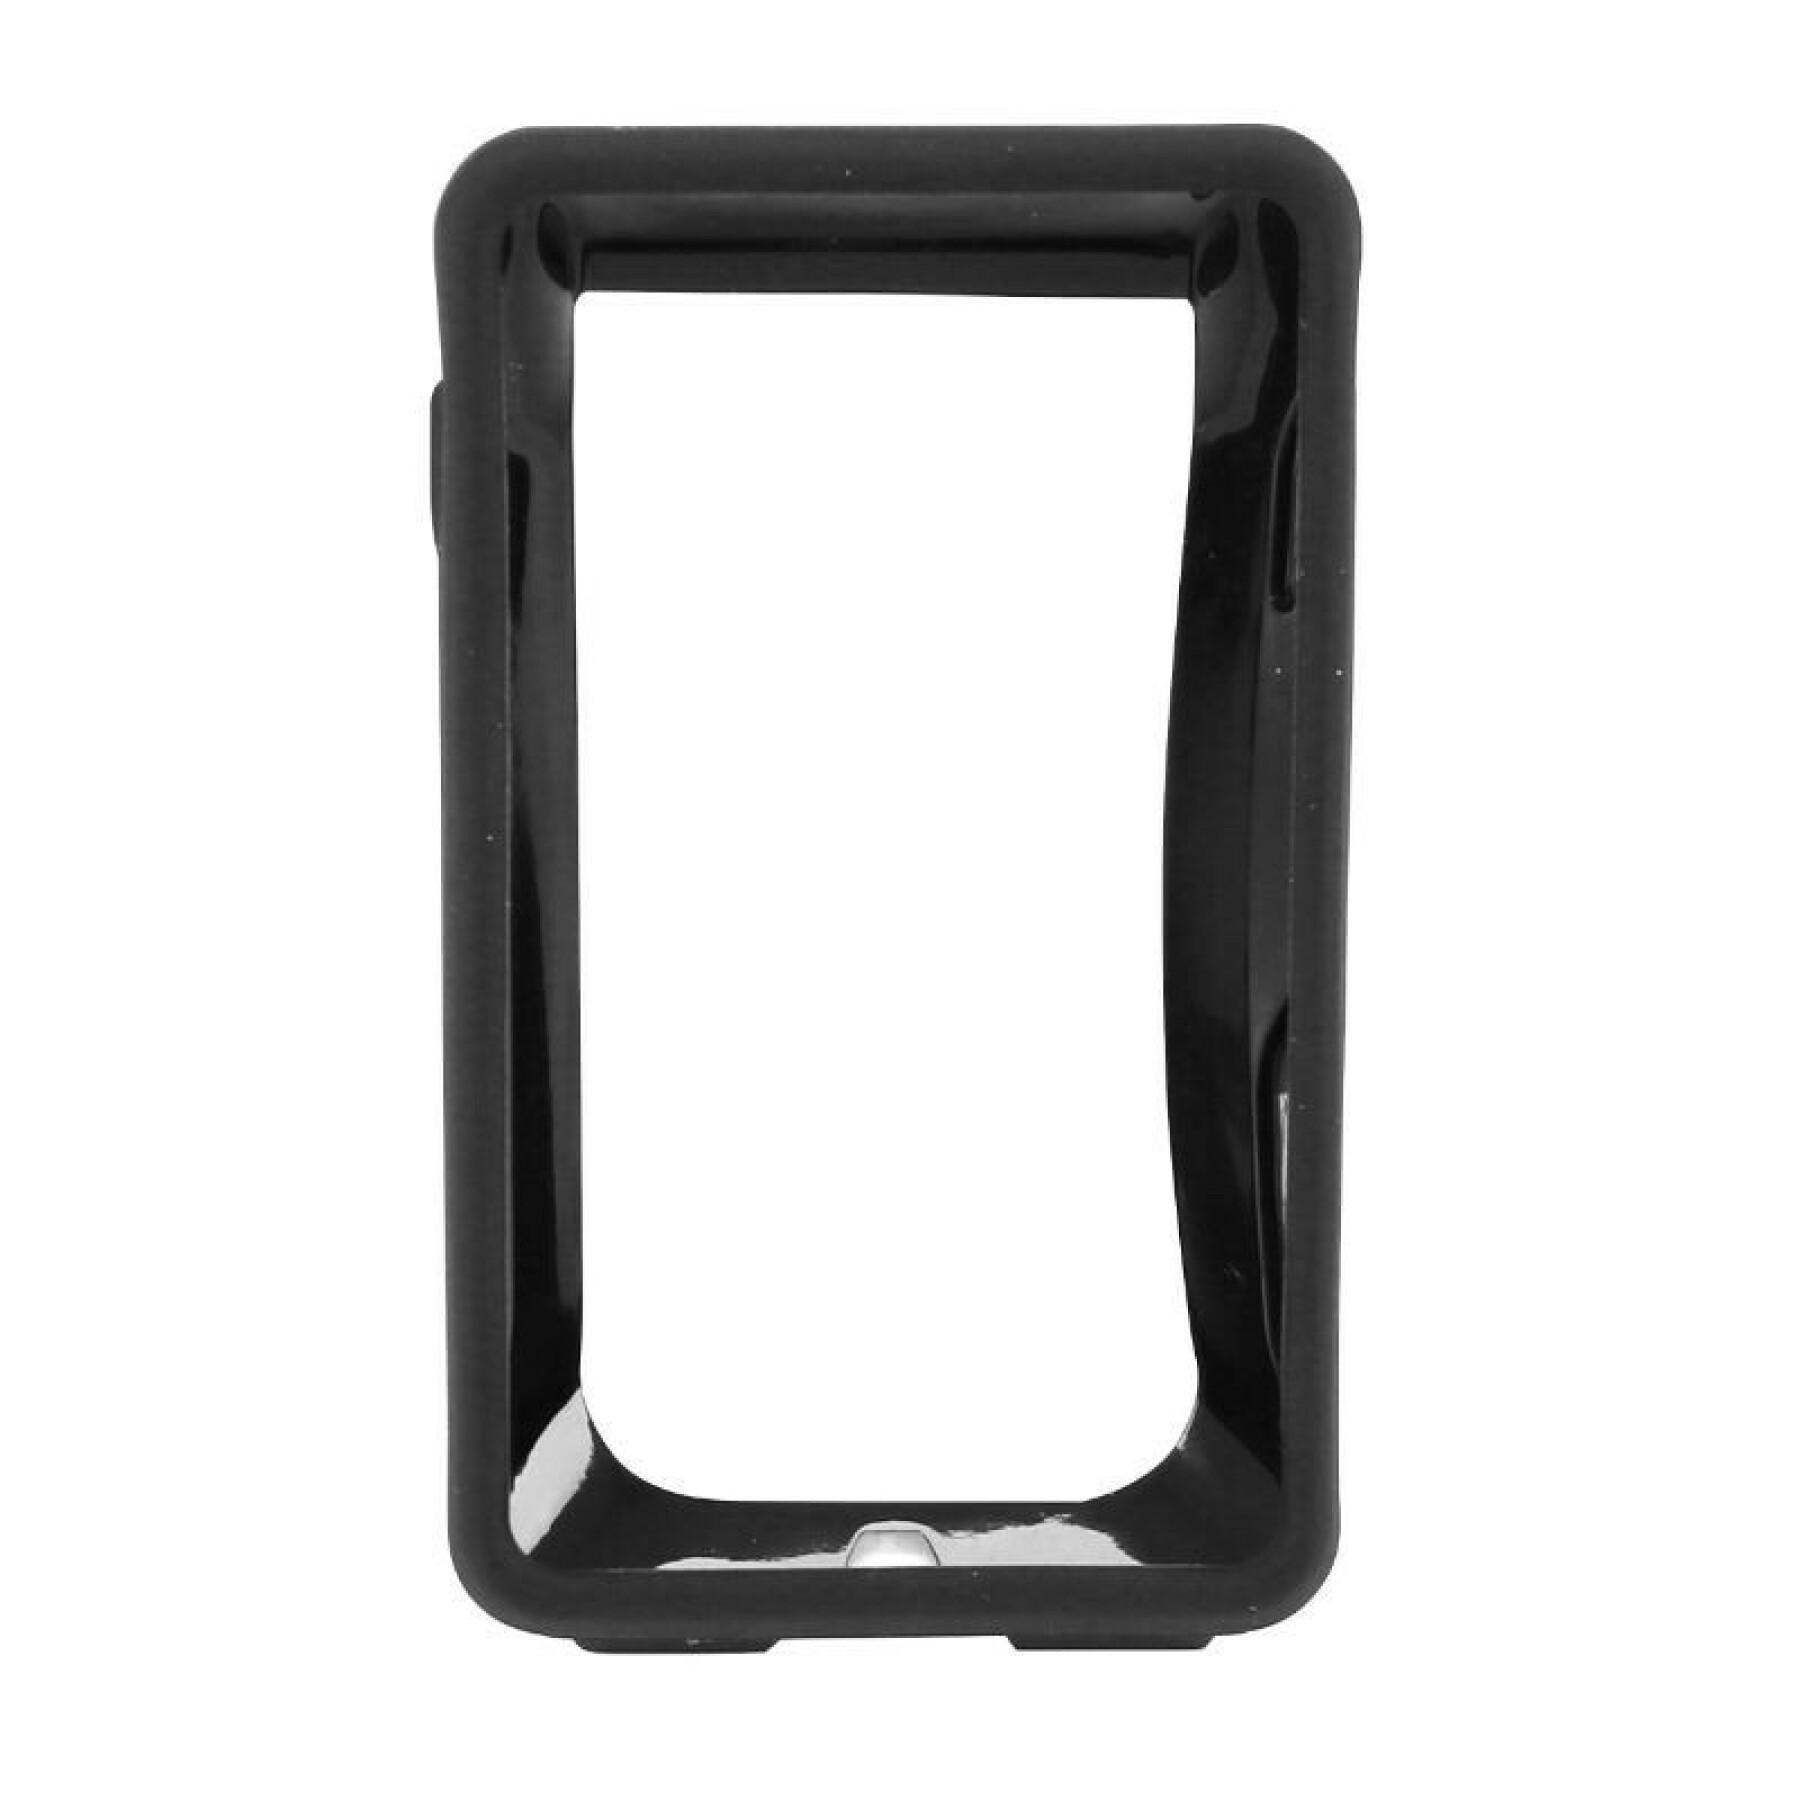 silicone case Igpsport BH630 (IGS630) - Meter supports